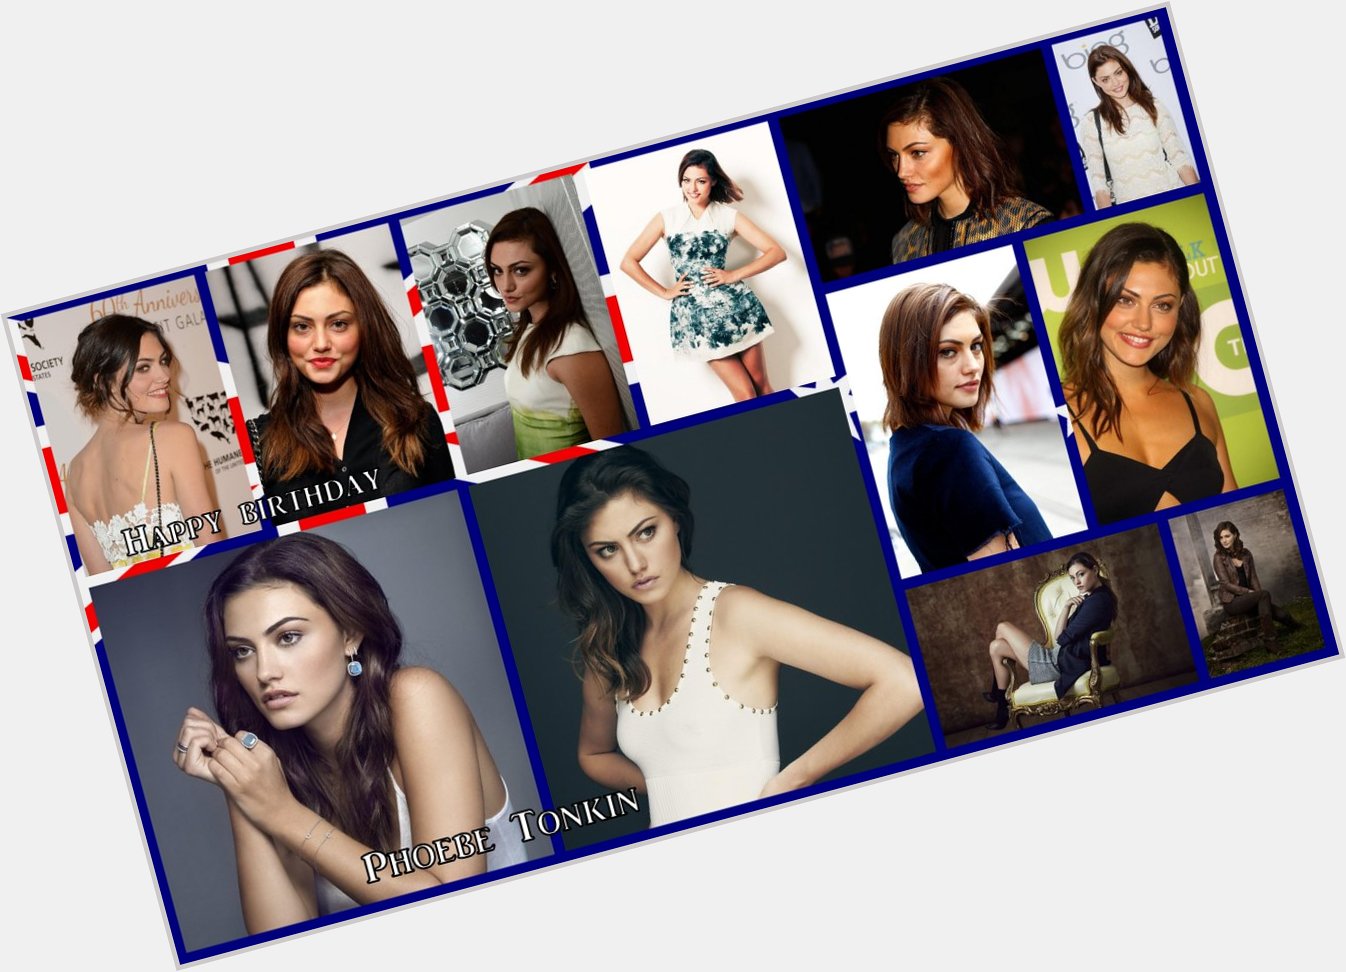 Happy birthday to the lovely and friendly Phoebe Tonkin.
Wish her a great day :D. 